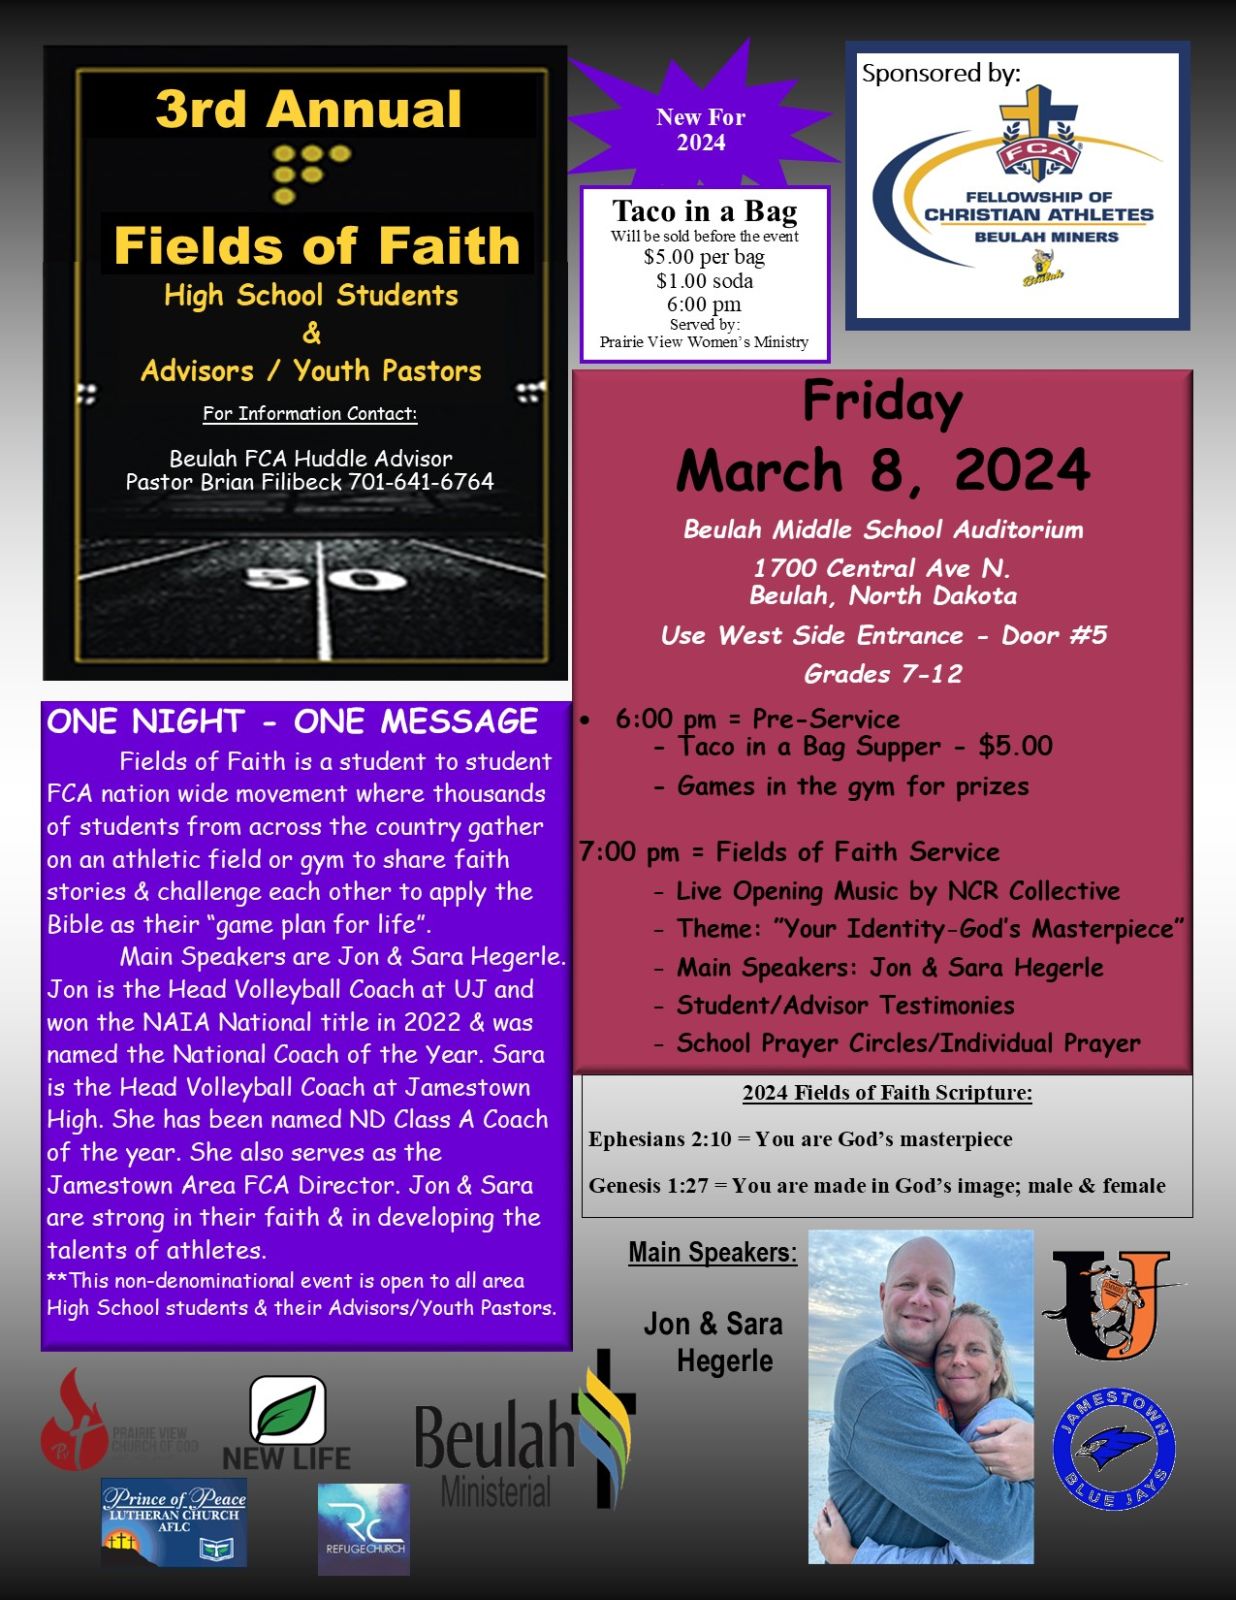 Event Promo Photo For 3rd Annual Fields of Faith